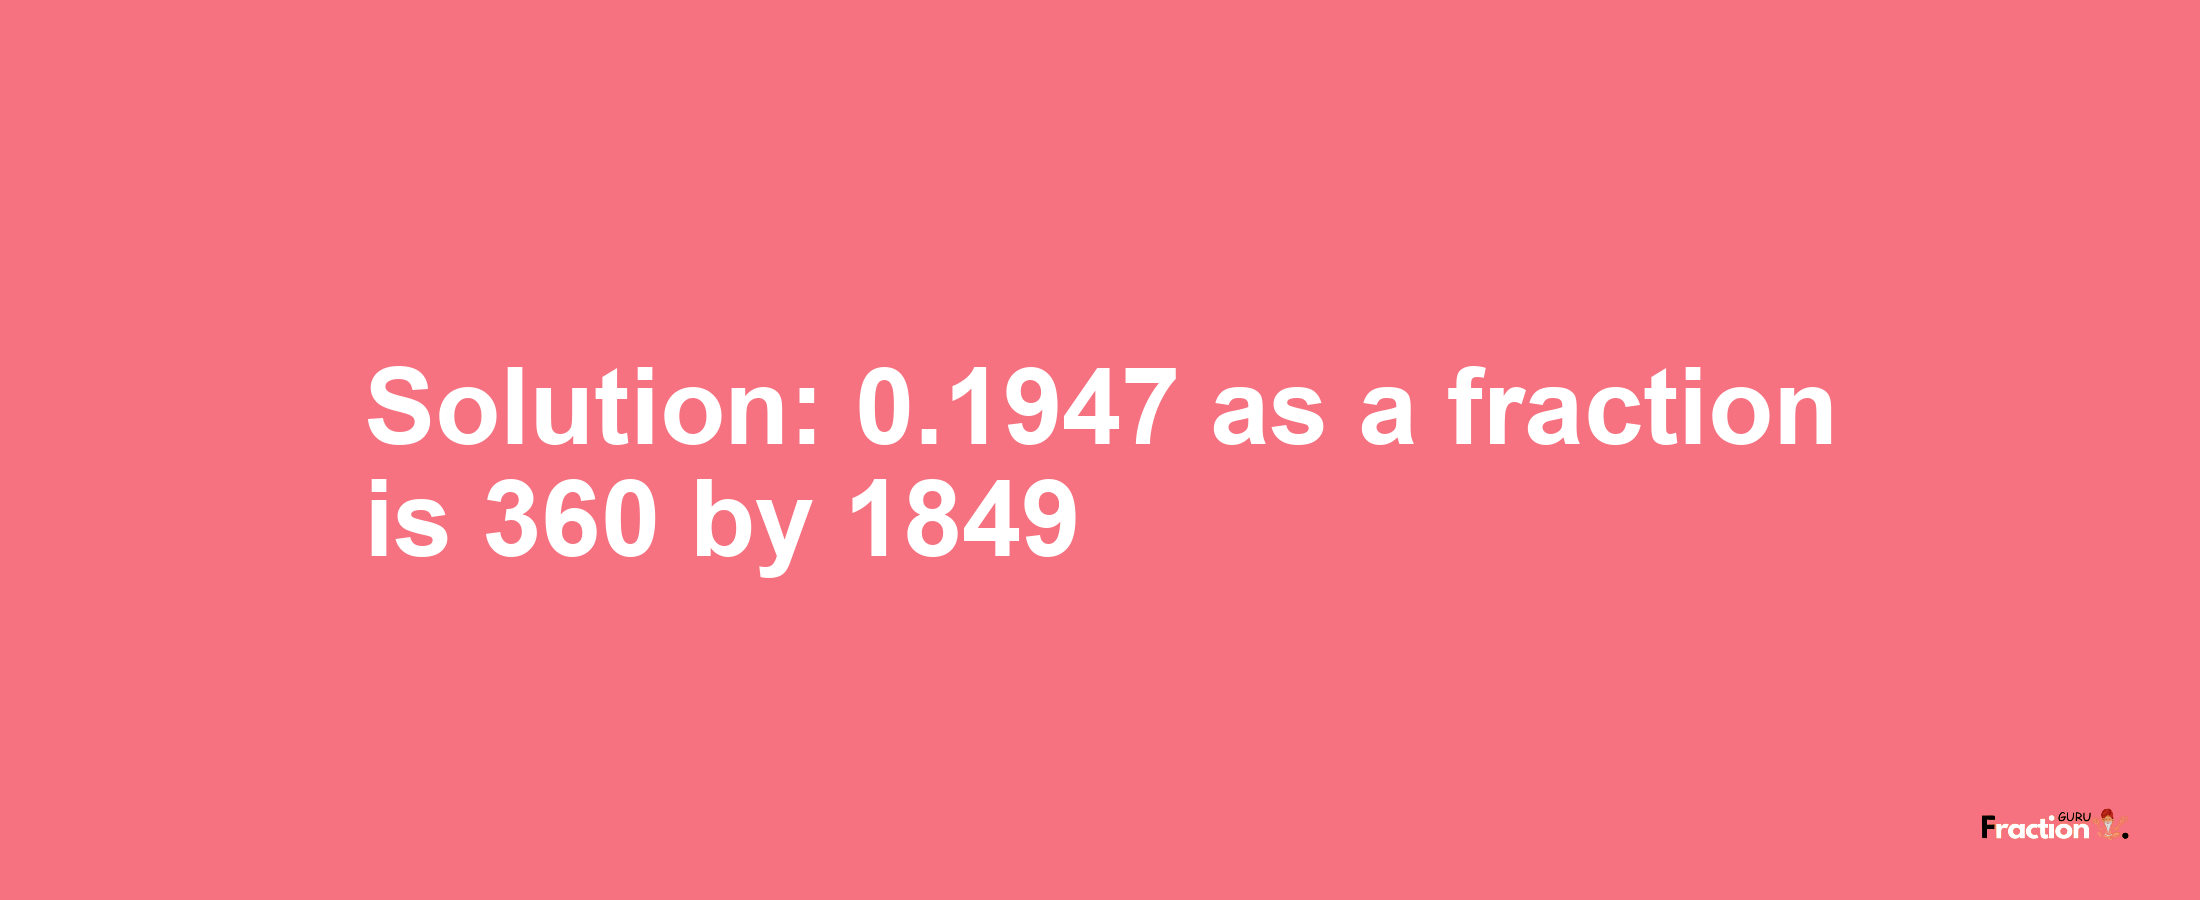 Solution:0.1947 as a fraction is 360/1849